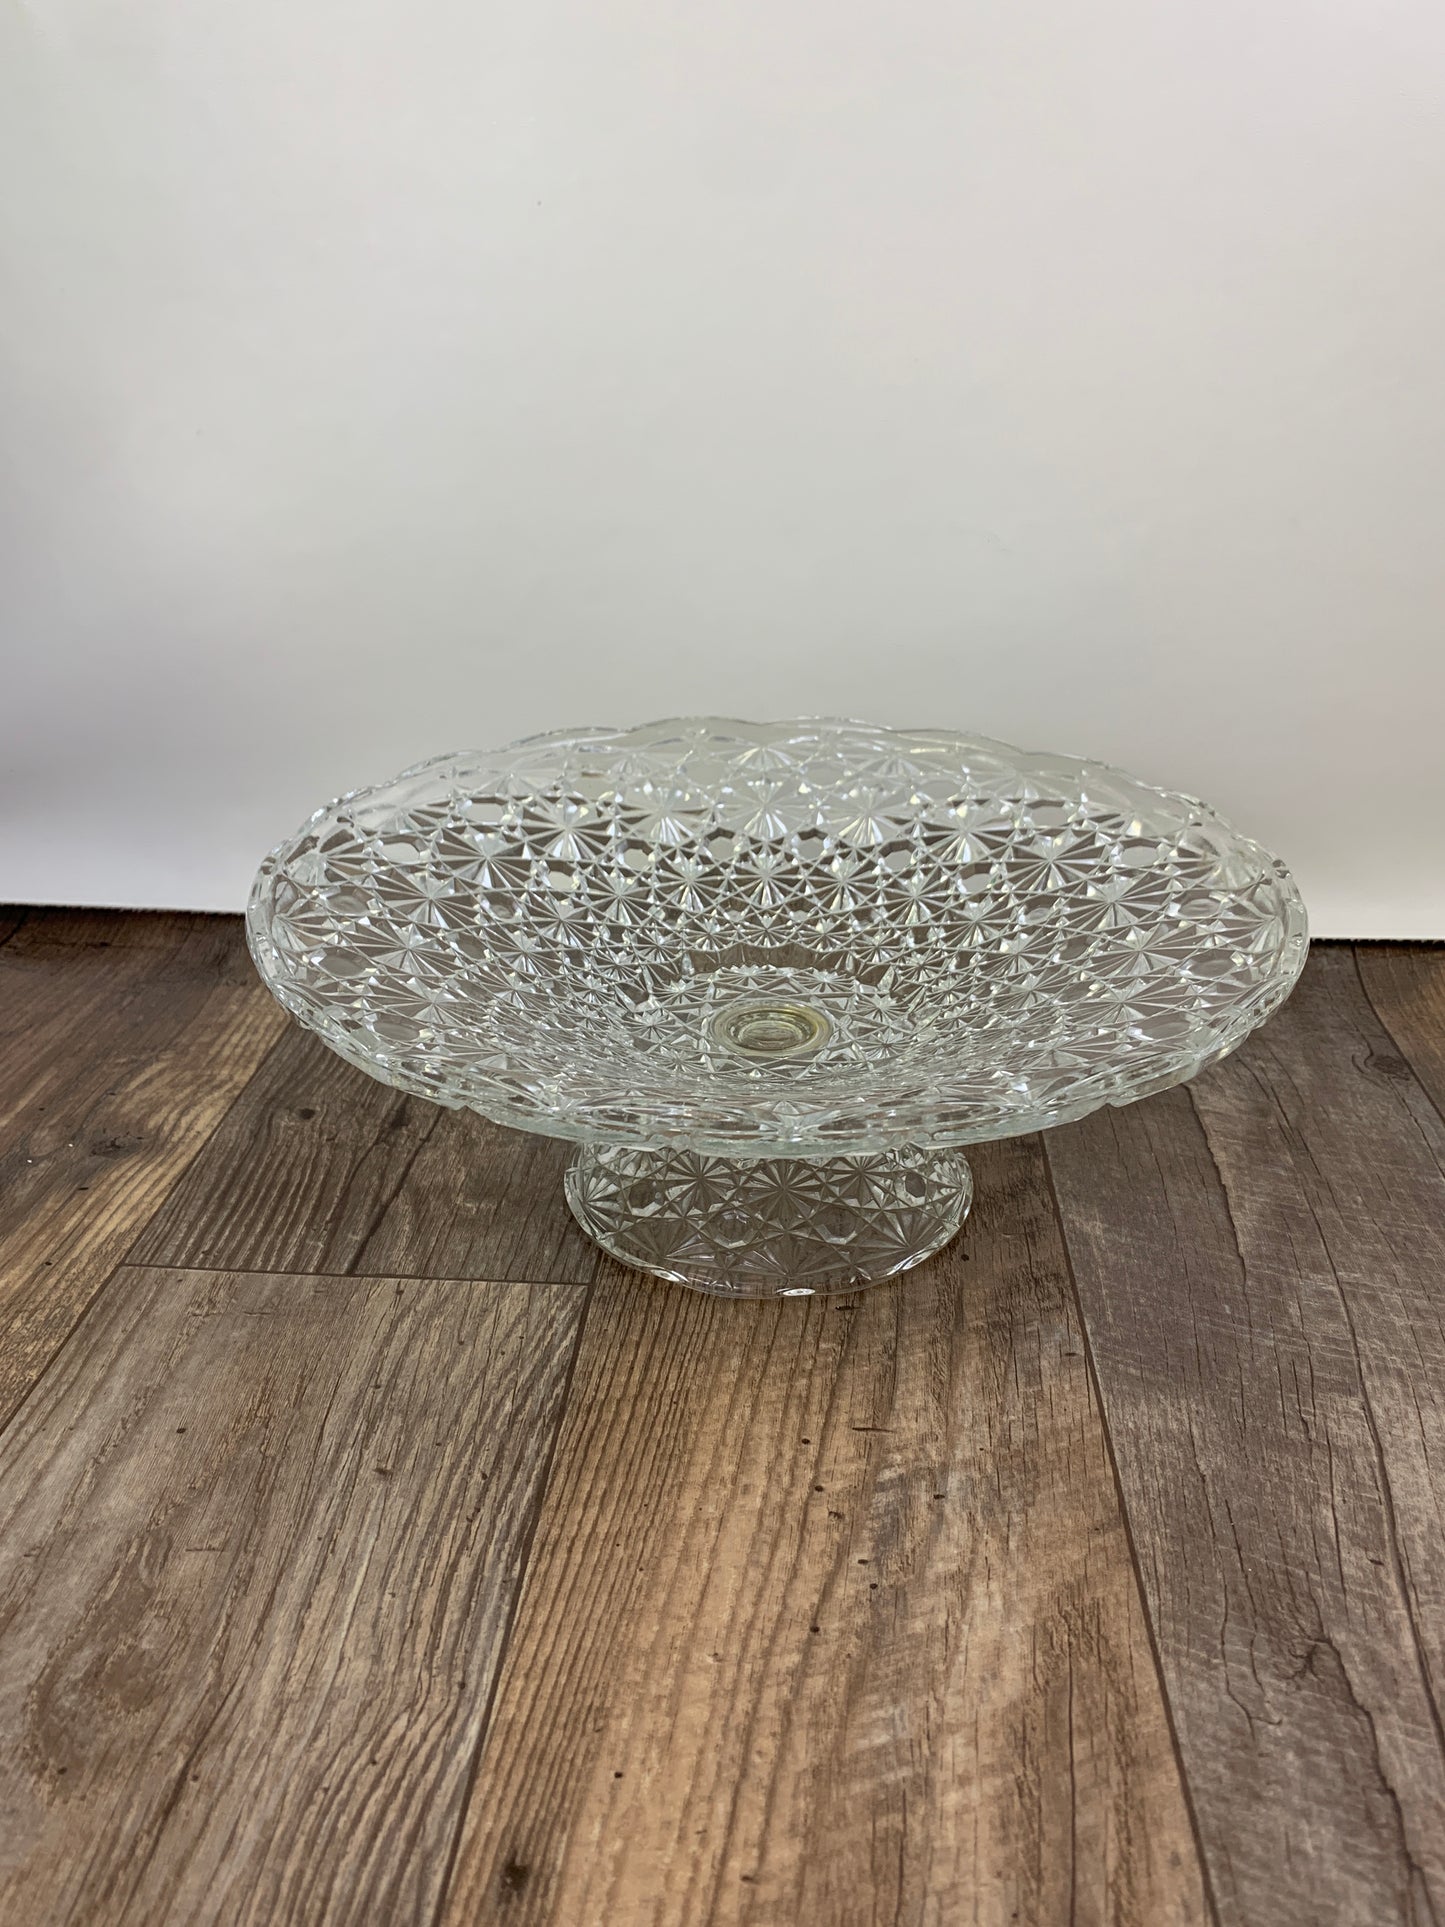 Large Fruit Bowl Vintage Low Bowl Daisy and Button Pressed Glass Footed Tray Large Pedestal Dish